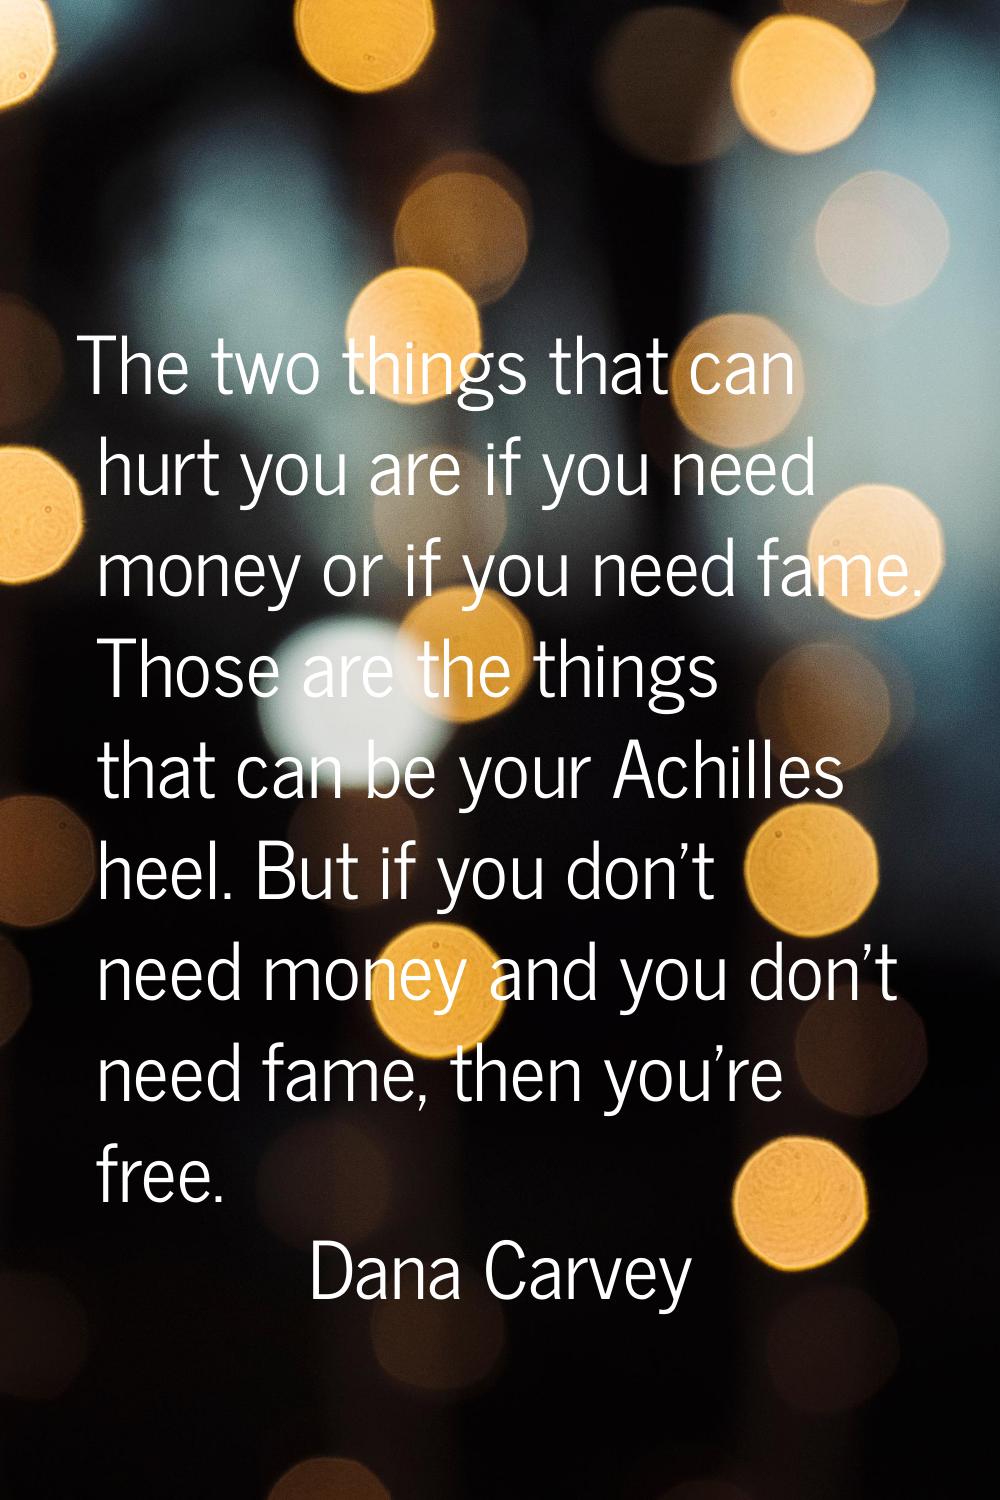 The two things that can hurt you are if you need money or if you need fame. Those are the things th